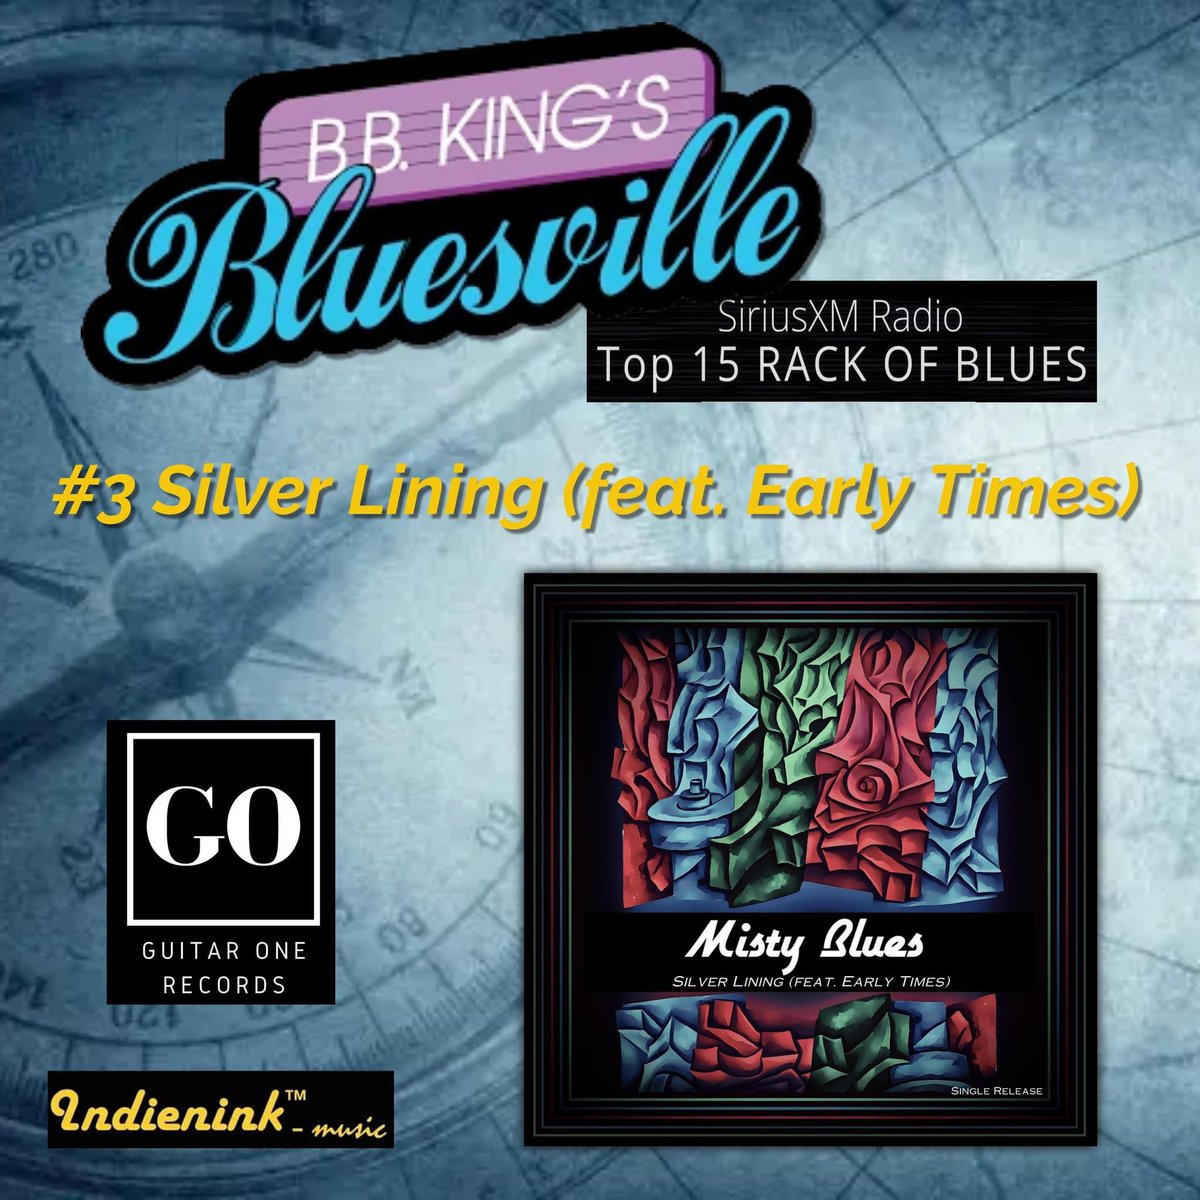 TOP 3 on Siriusxm Bluesville’s Rack Of Blues for a 2nd week!!! Get a digital copy of our 25th Anniversary album “Silver Lining.” Special pricing in place until May 10th. mistybluesband.bandcamp.com/album/silver-l…